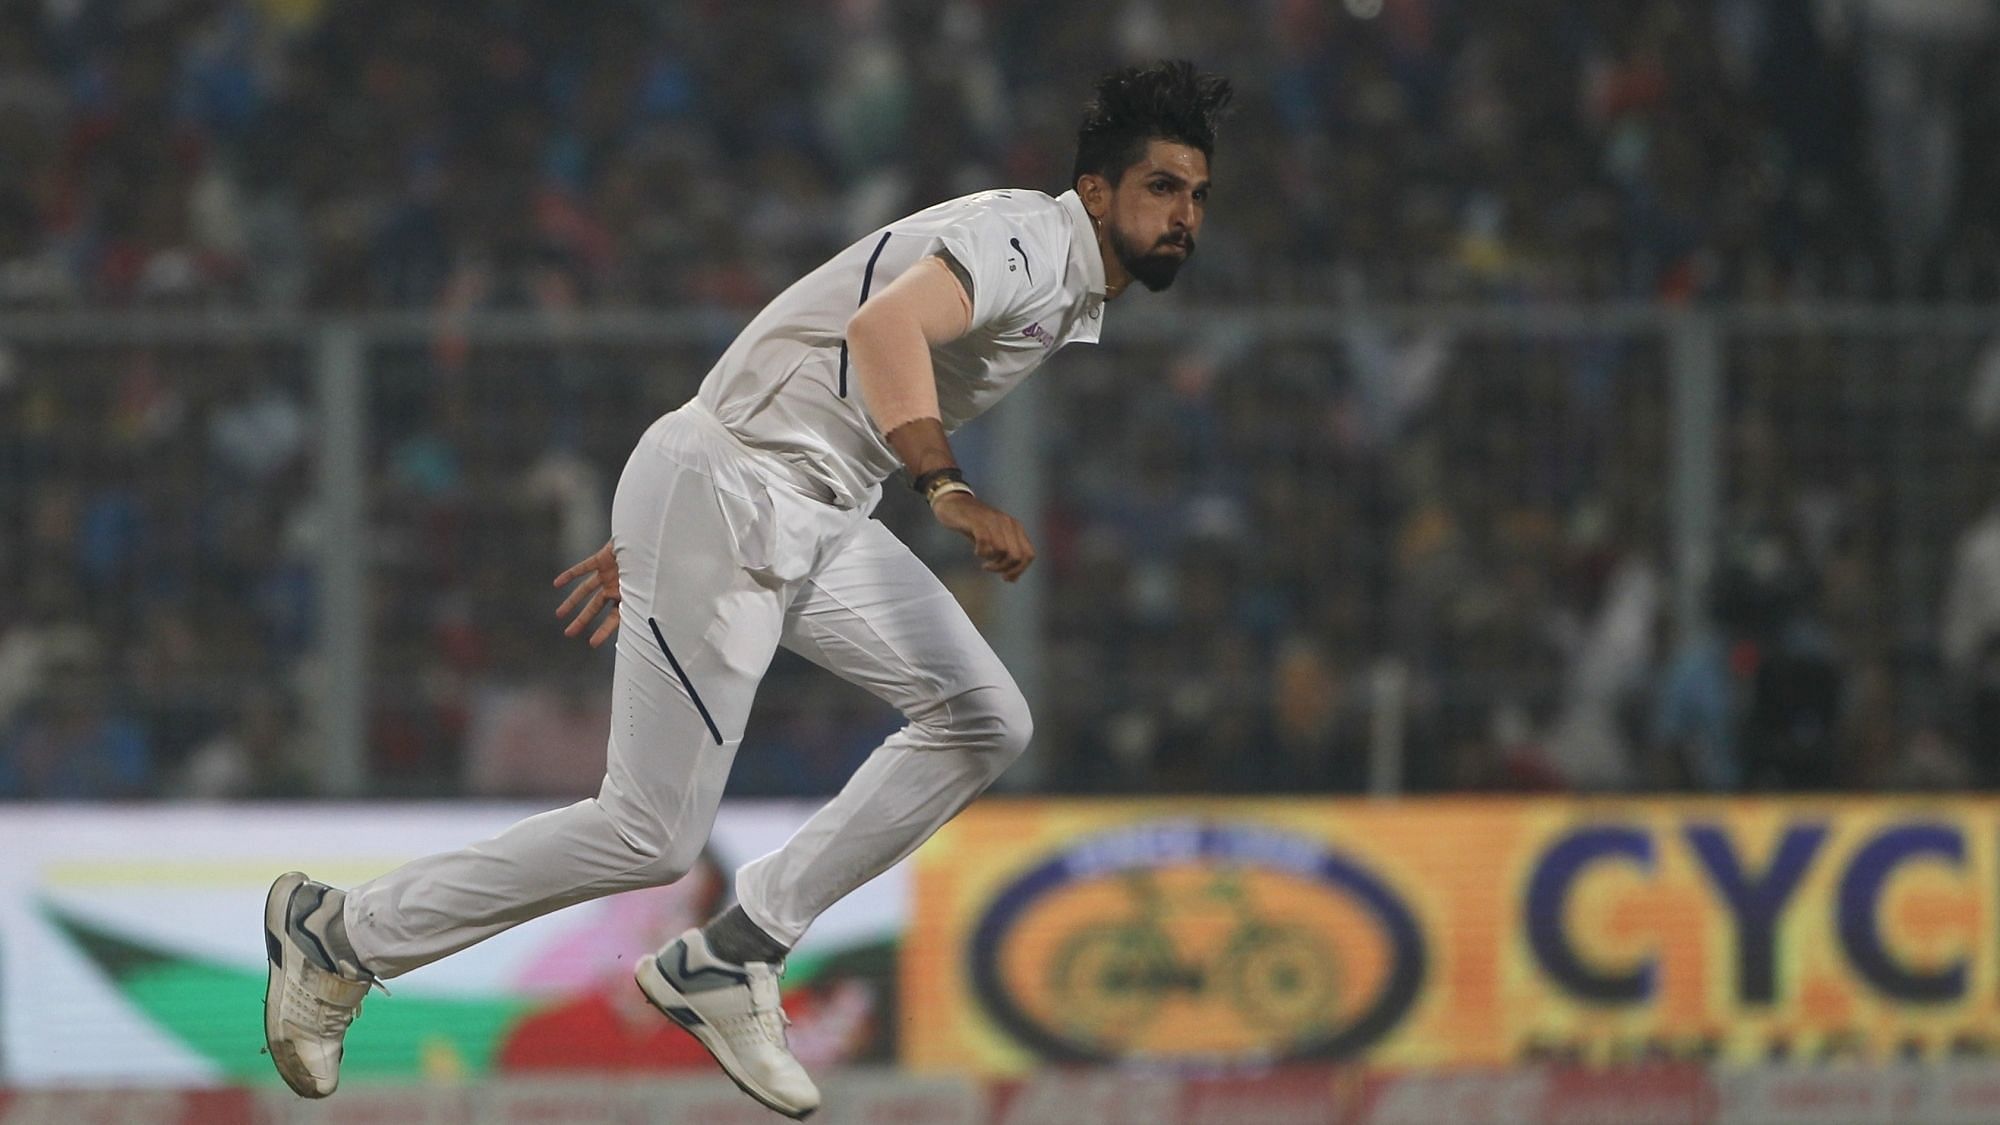  Ishant Sharma hurt his ankle badly while bowling during a Ranji Trophy game on Monday, 19 January just before the announcement of the Test squad for the New Zealand tour.